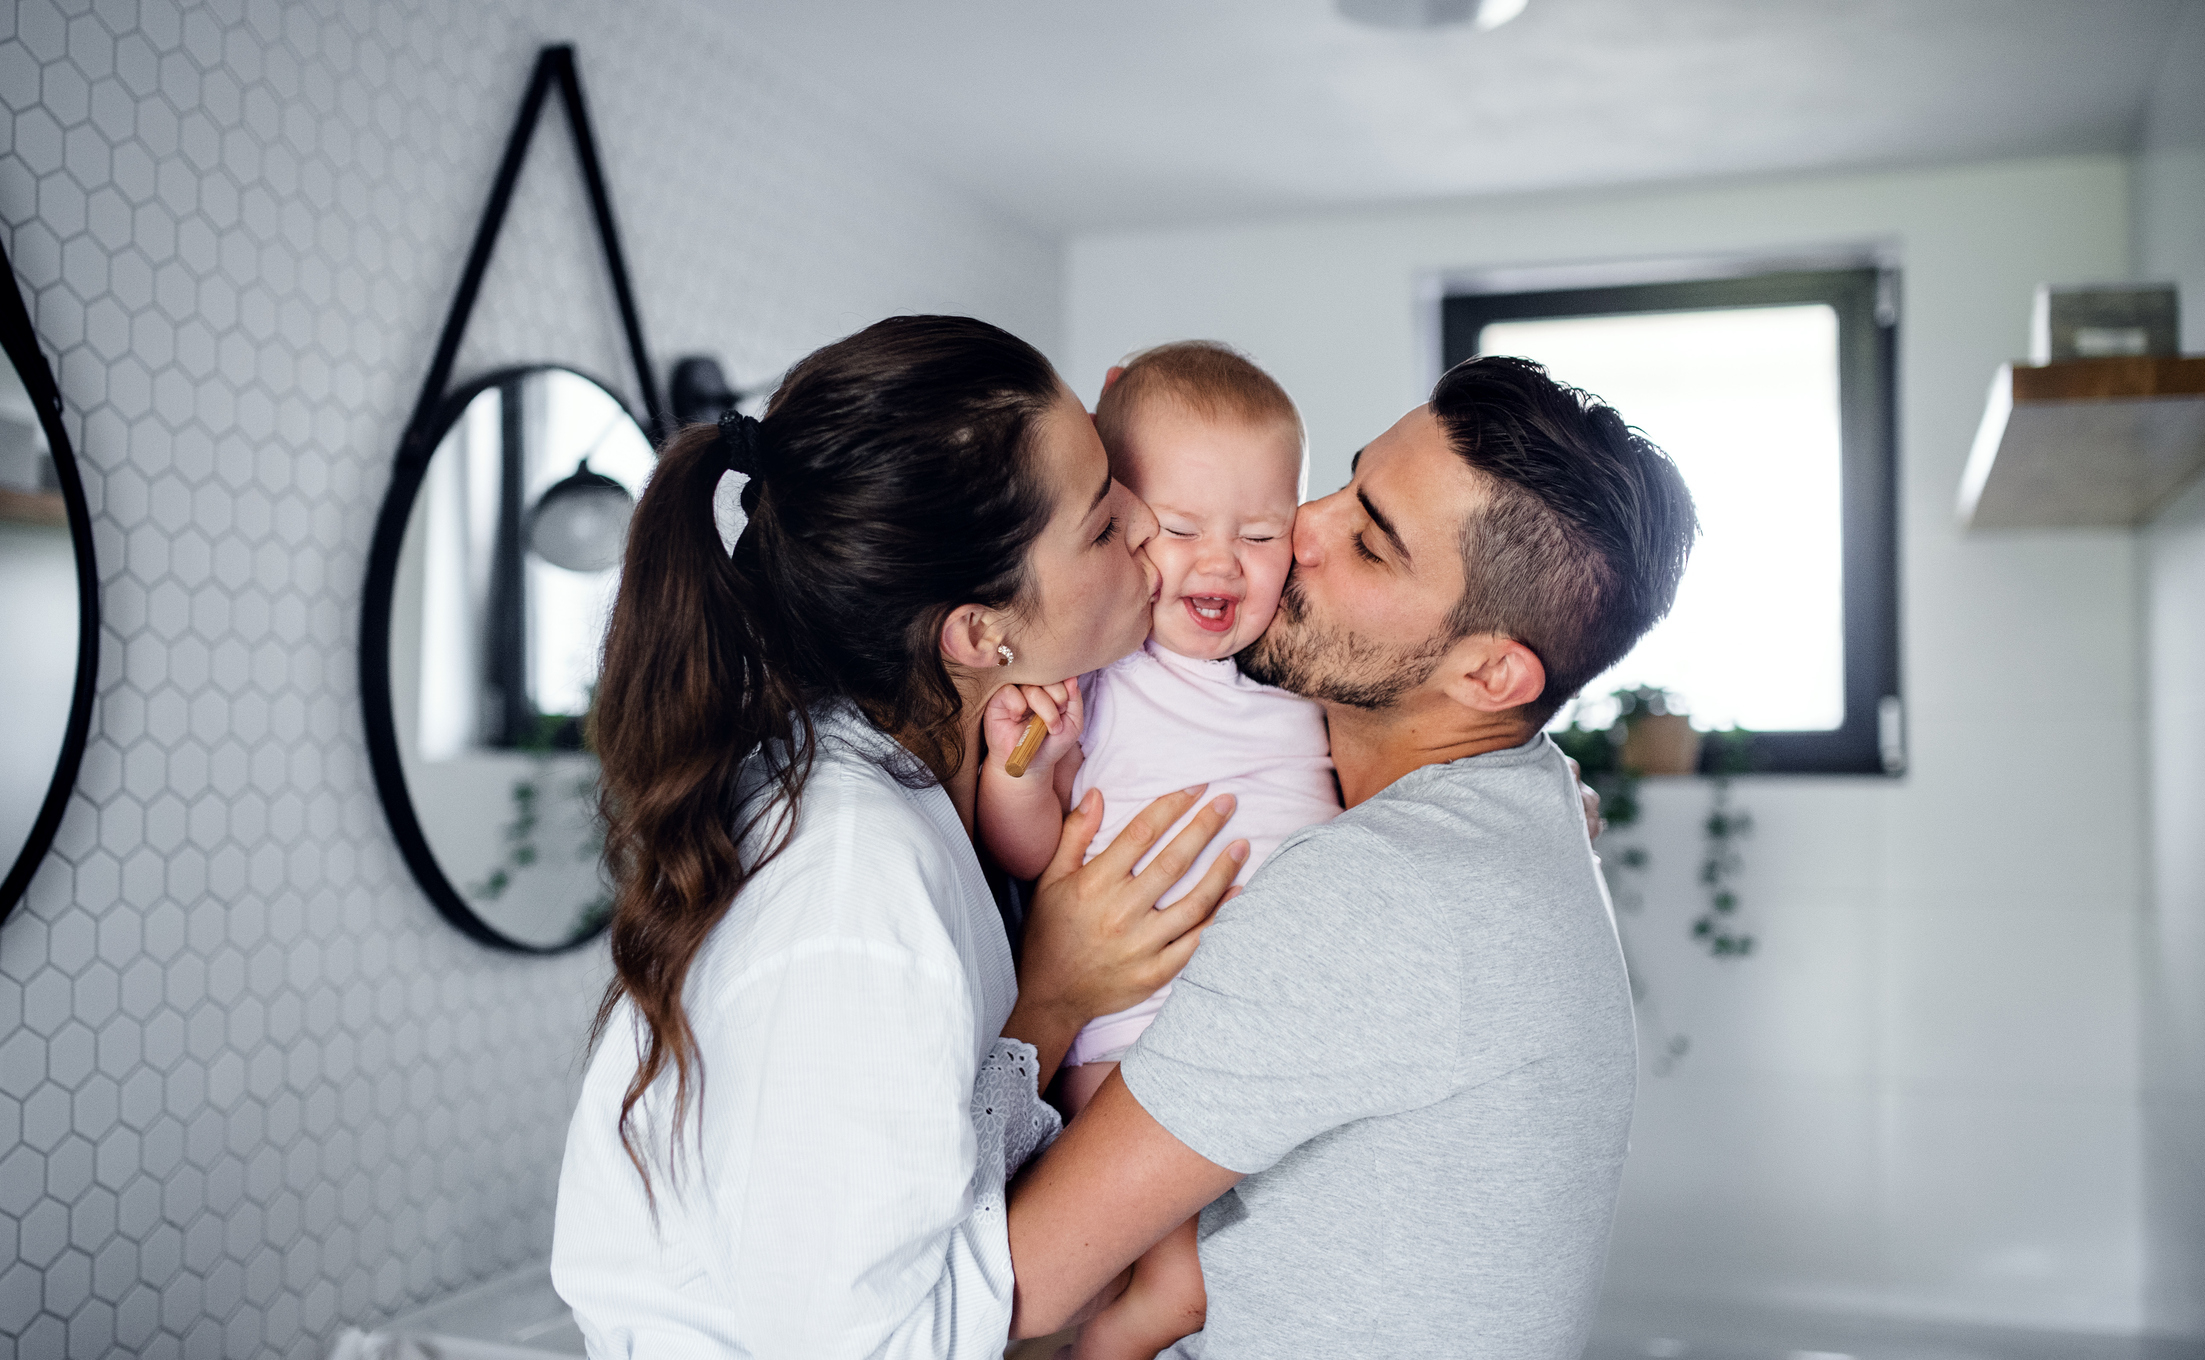 Two parents lovingly kiss a toddler&#x27;s cheeks from either side in a home bathroom